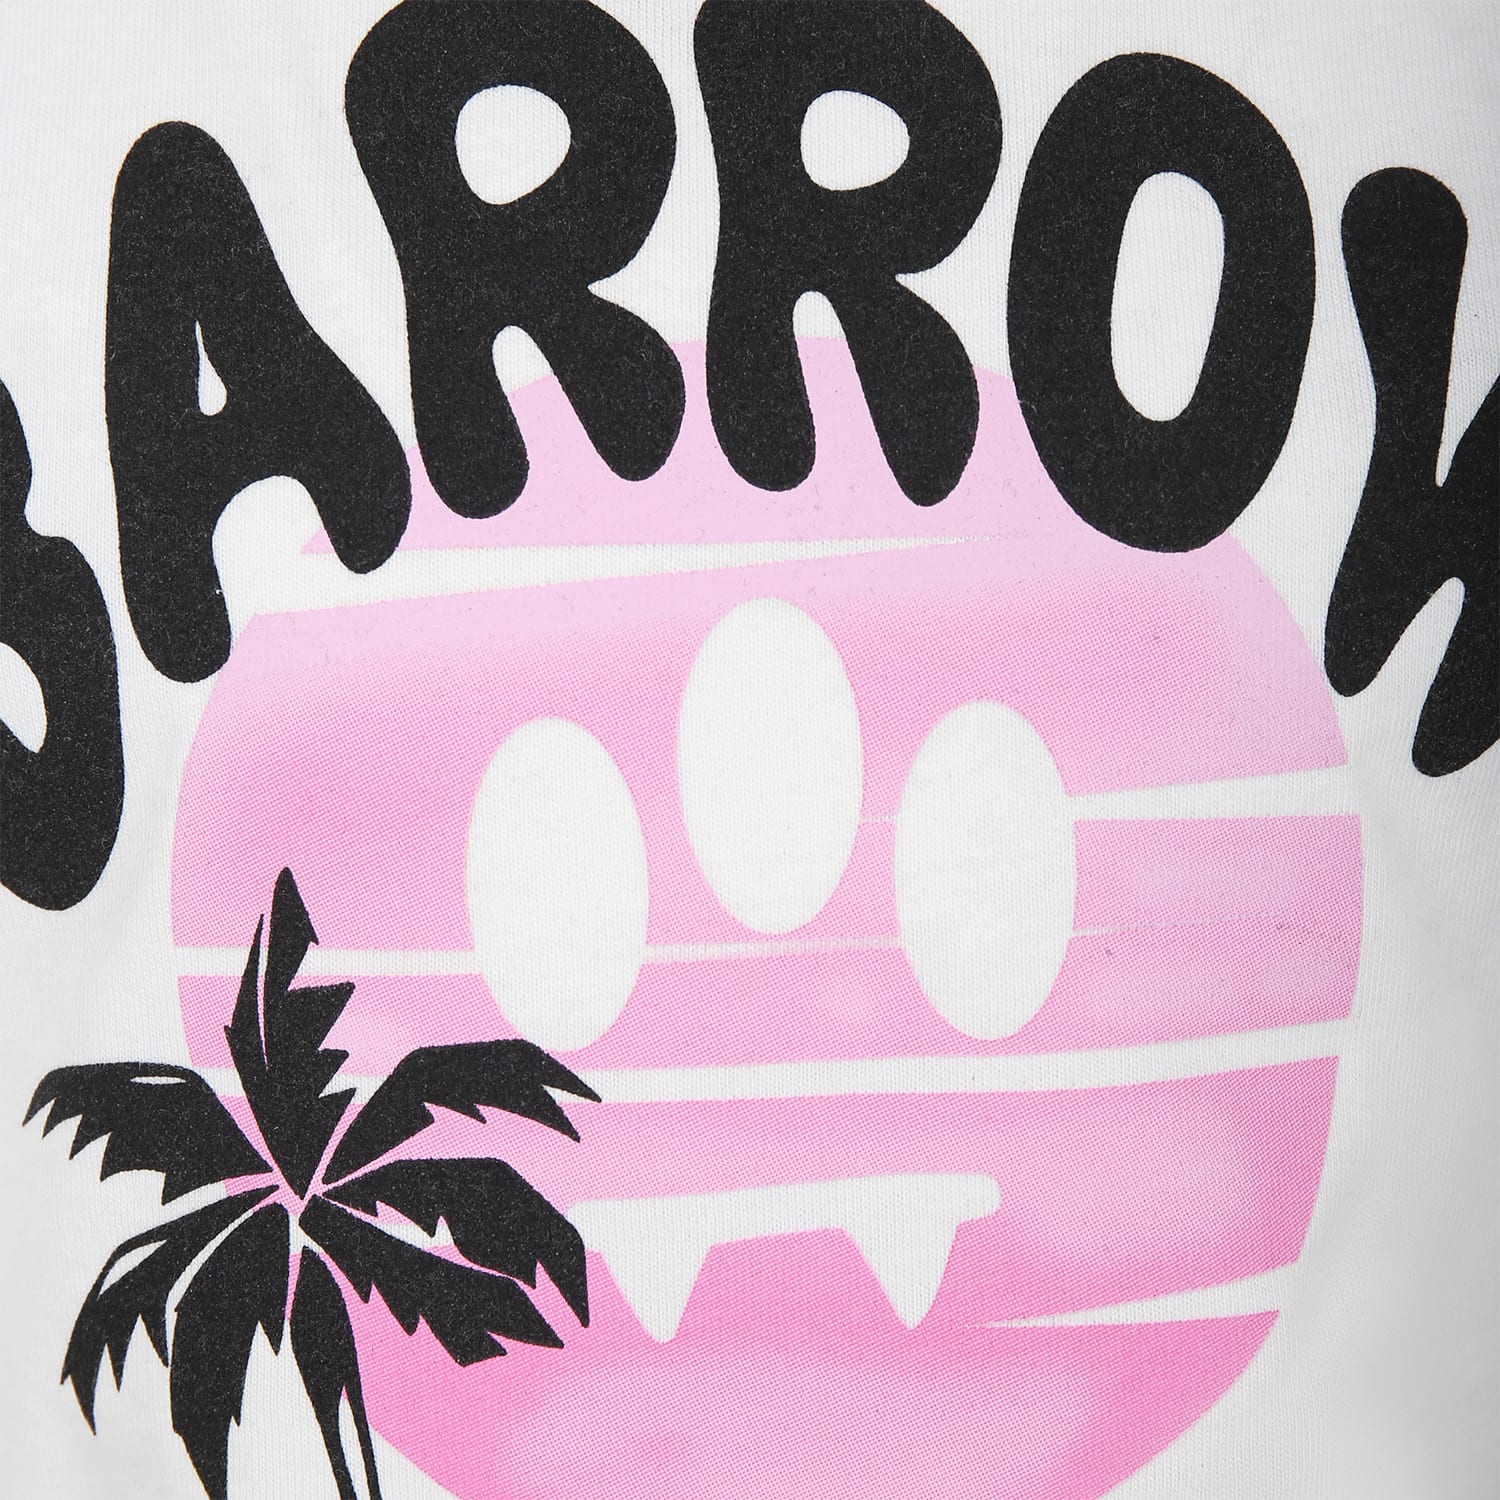 Shop Barrow White T-shirt For Girl With Logo